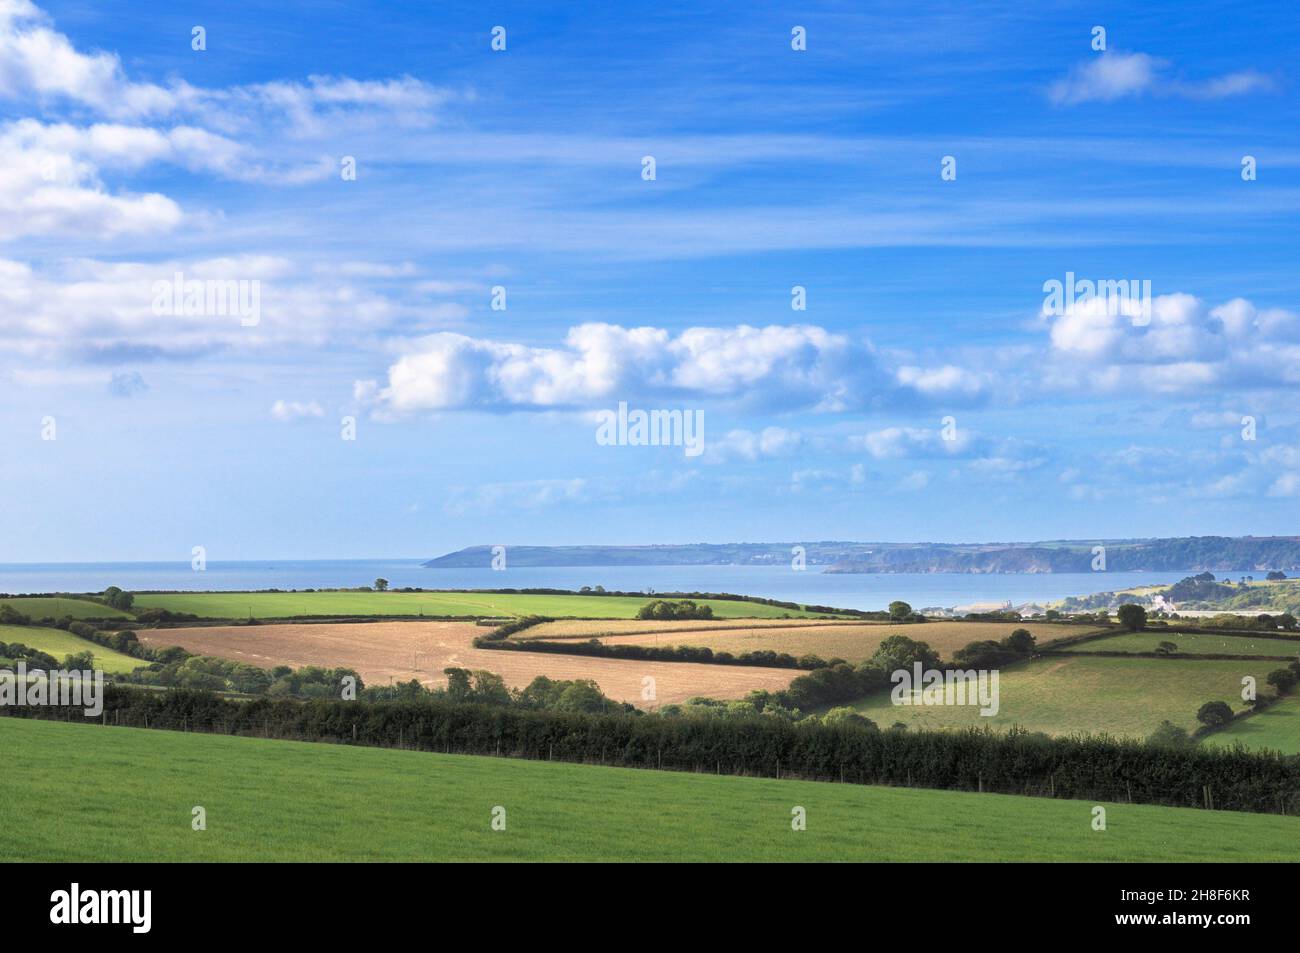 A simple view of countryside with green fields, trees, hedgerows and seedbeds on farmland by the Cornish coast, Cornwall, England, UK. Stock Photo